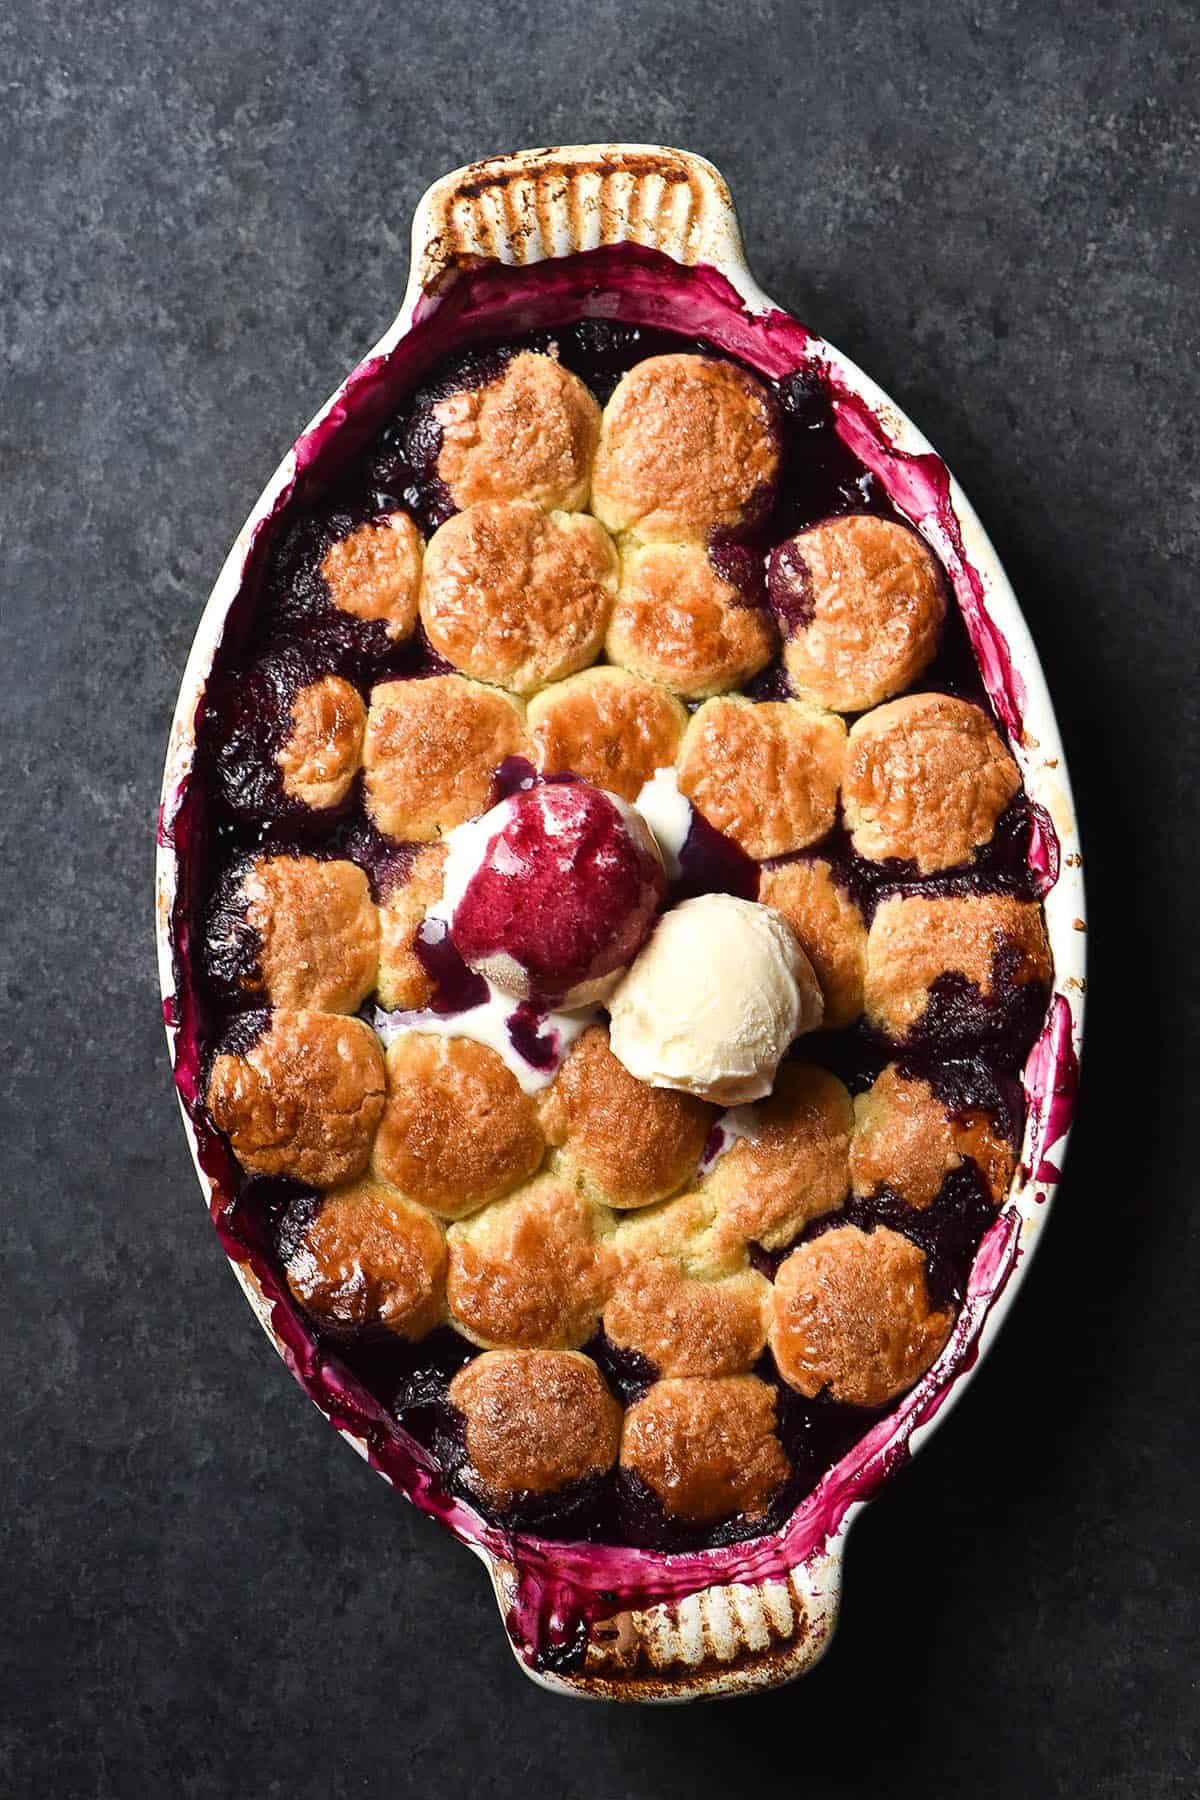 An aerial image of a gluten free blueberry cobbler on a dark blue backdrop. The cobbler is topped with two scoops of vanilla ice cream, and one has been covered in deep purple blueberry juices